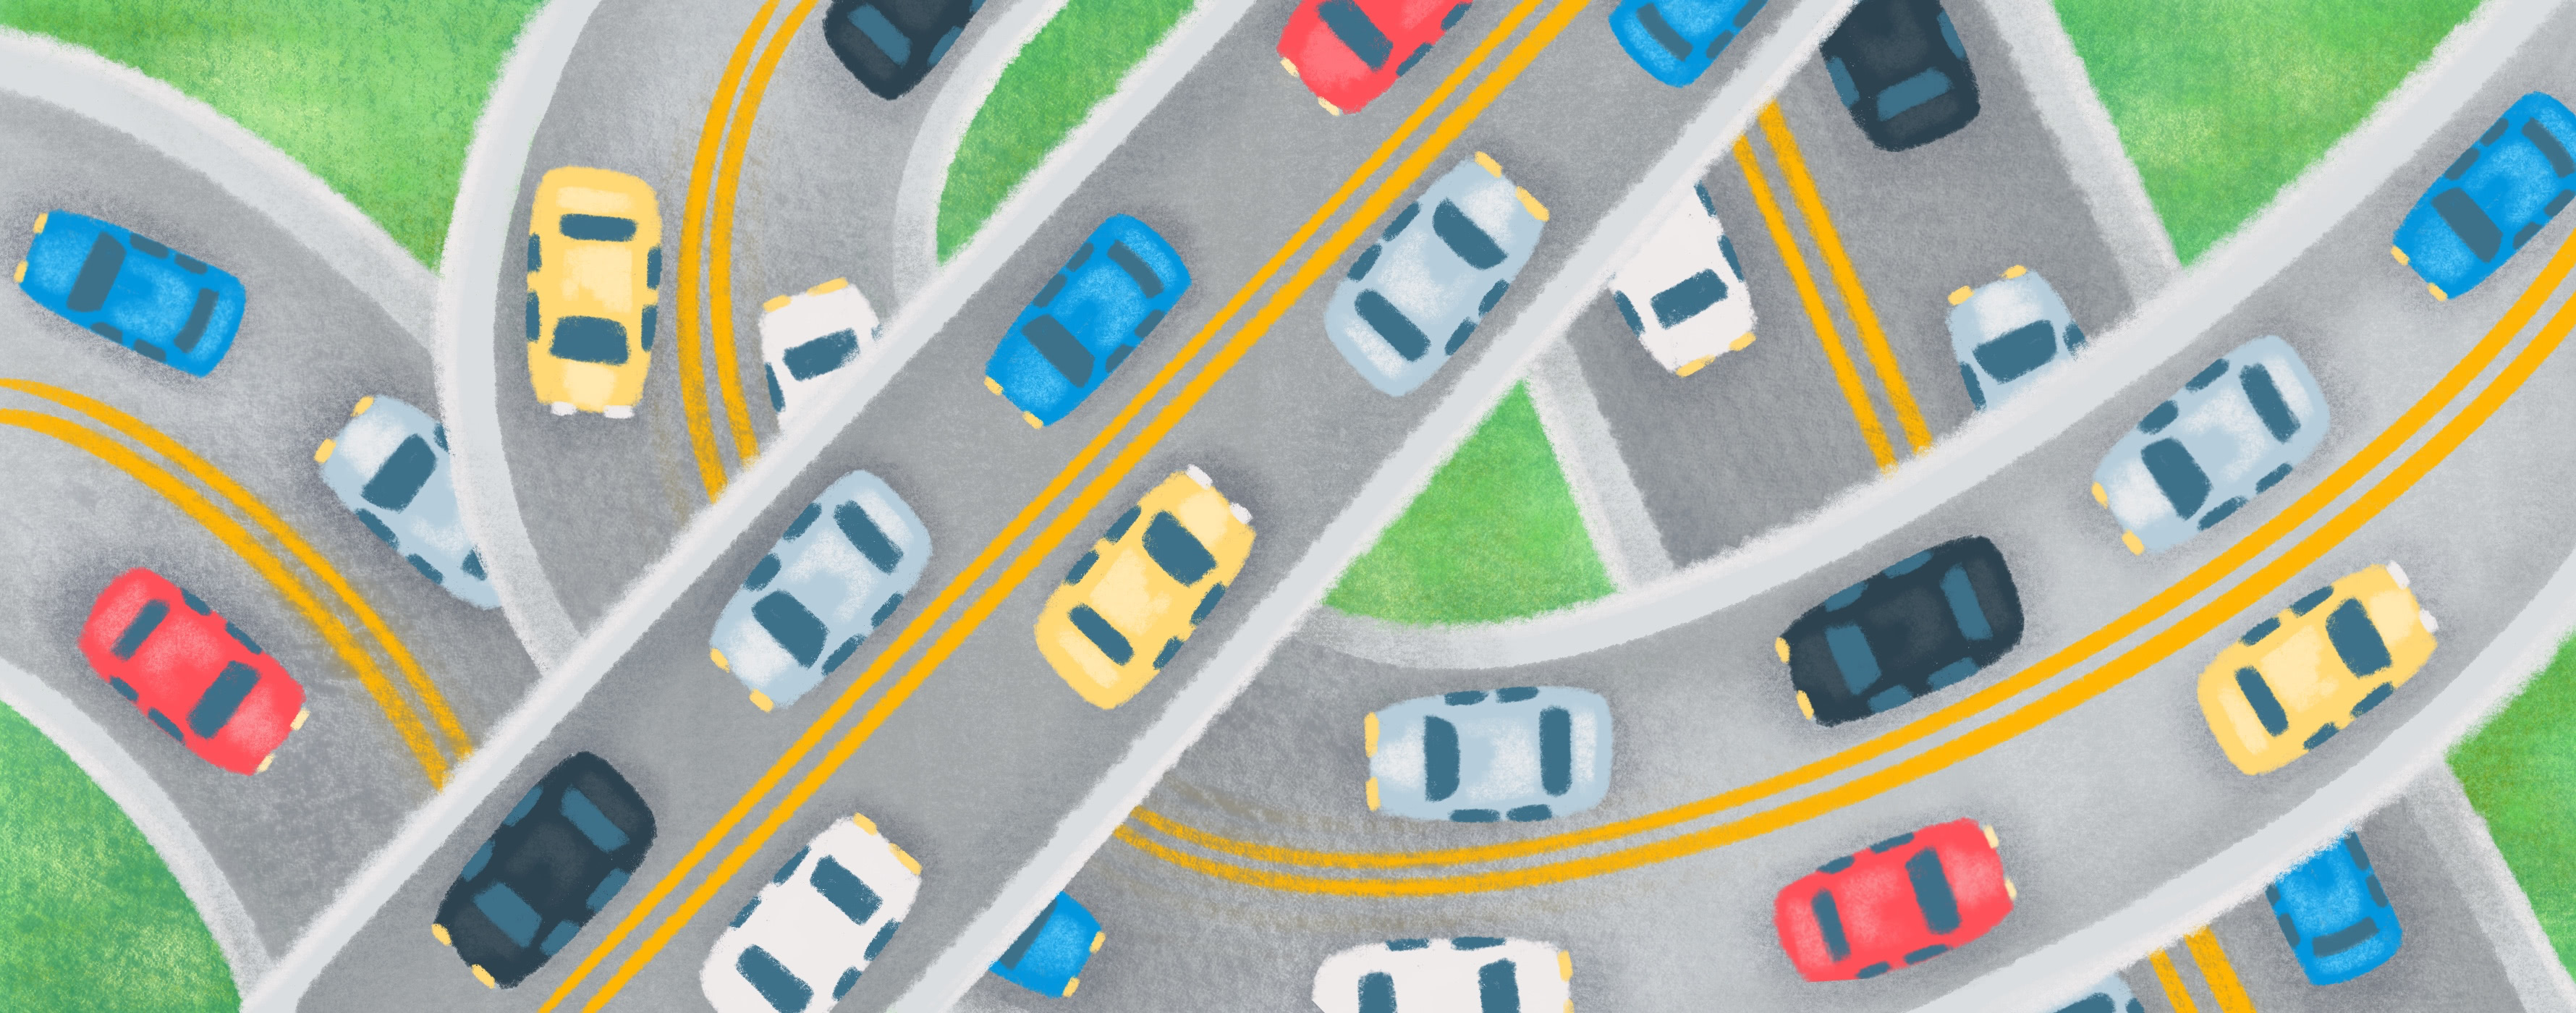 stylized graphic of overlapping roads with cars on them